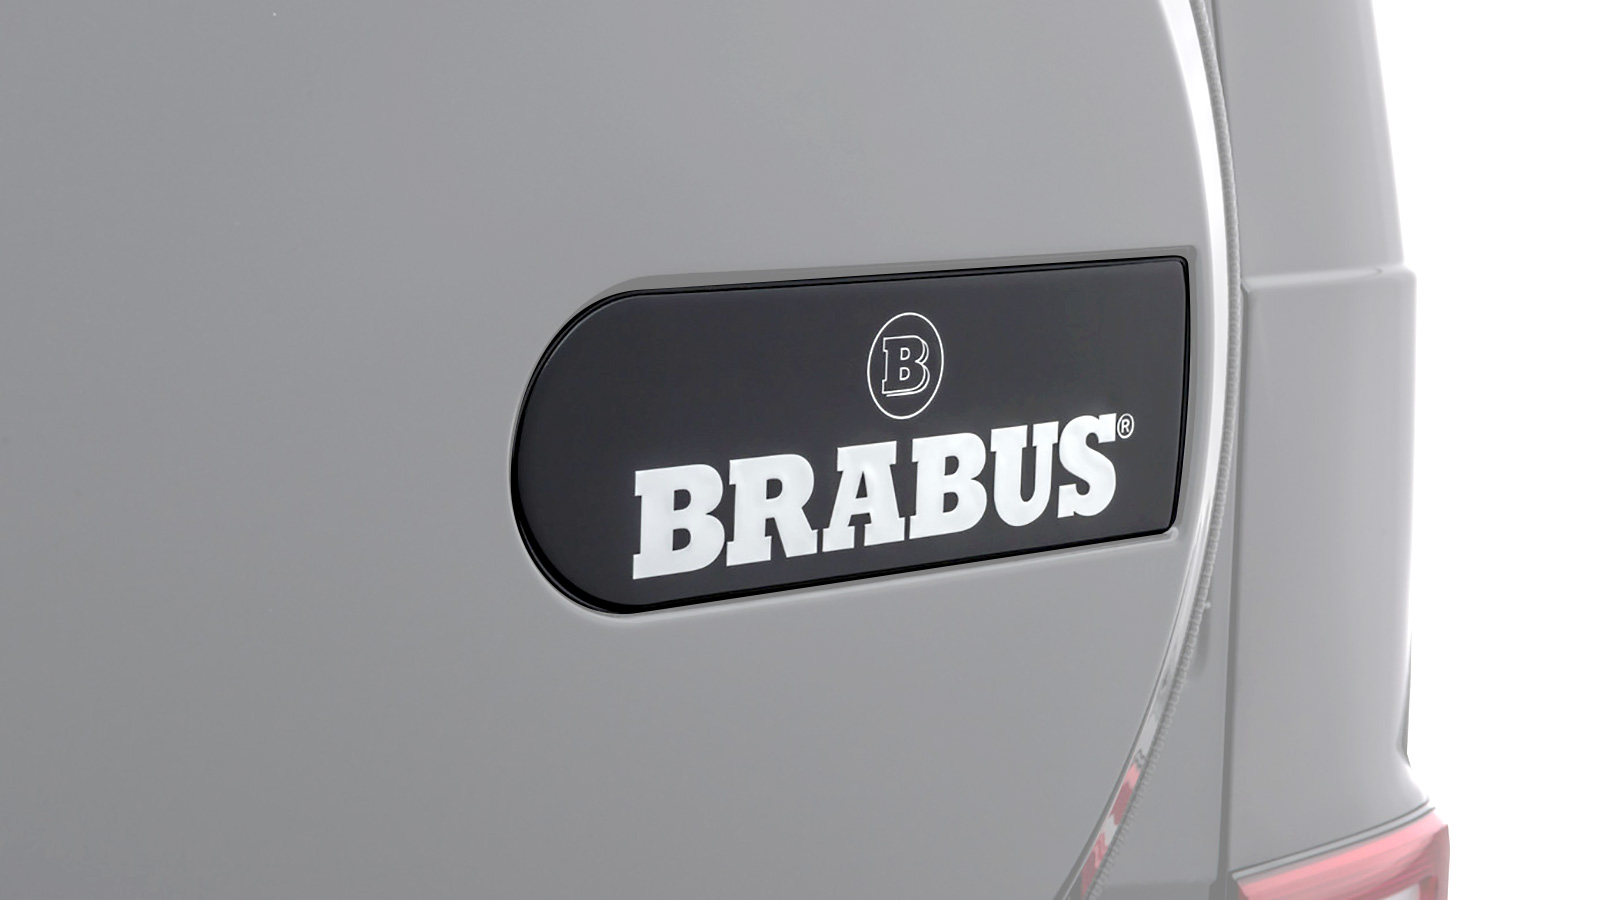 Brabus logo on spare wheel cover Buy with delivery, installation